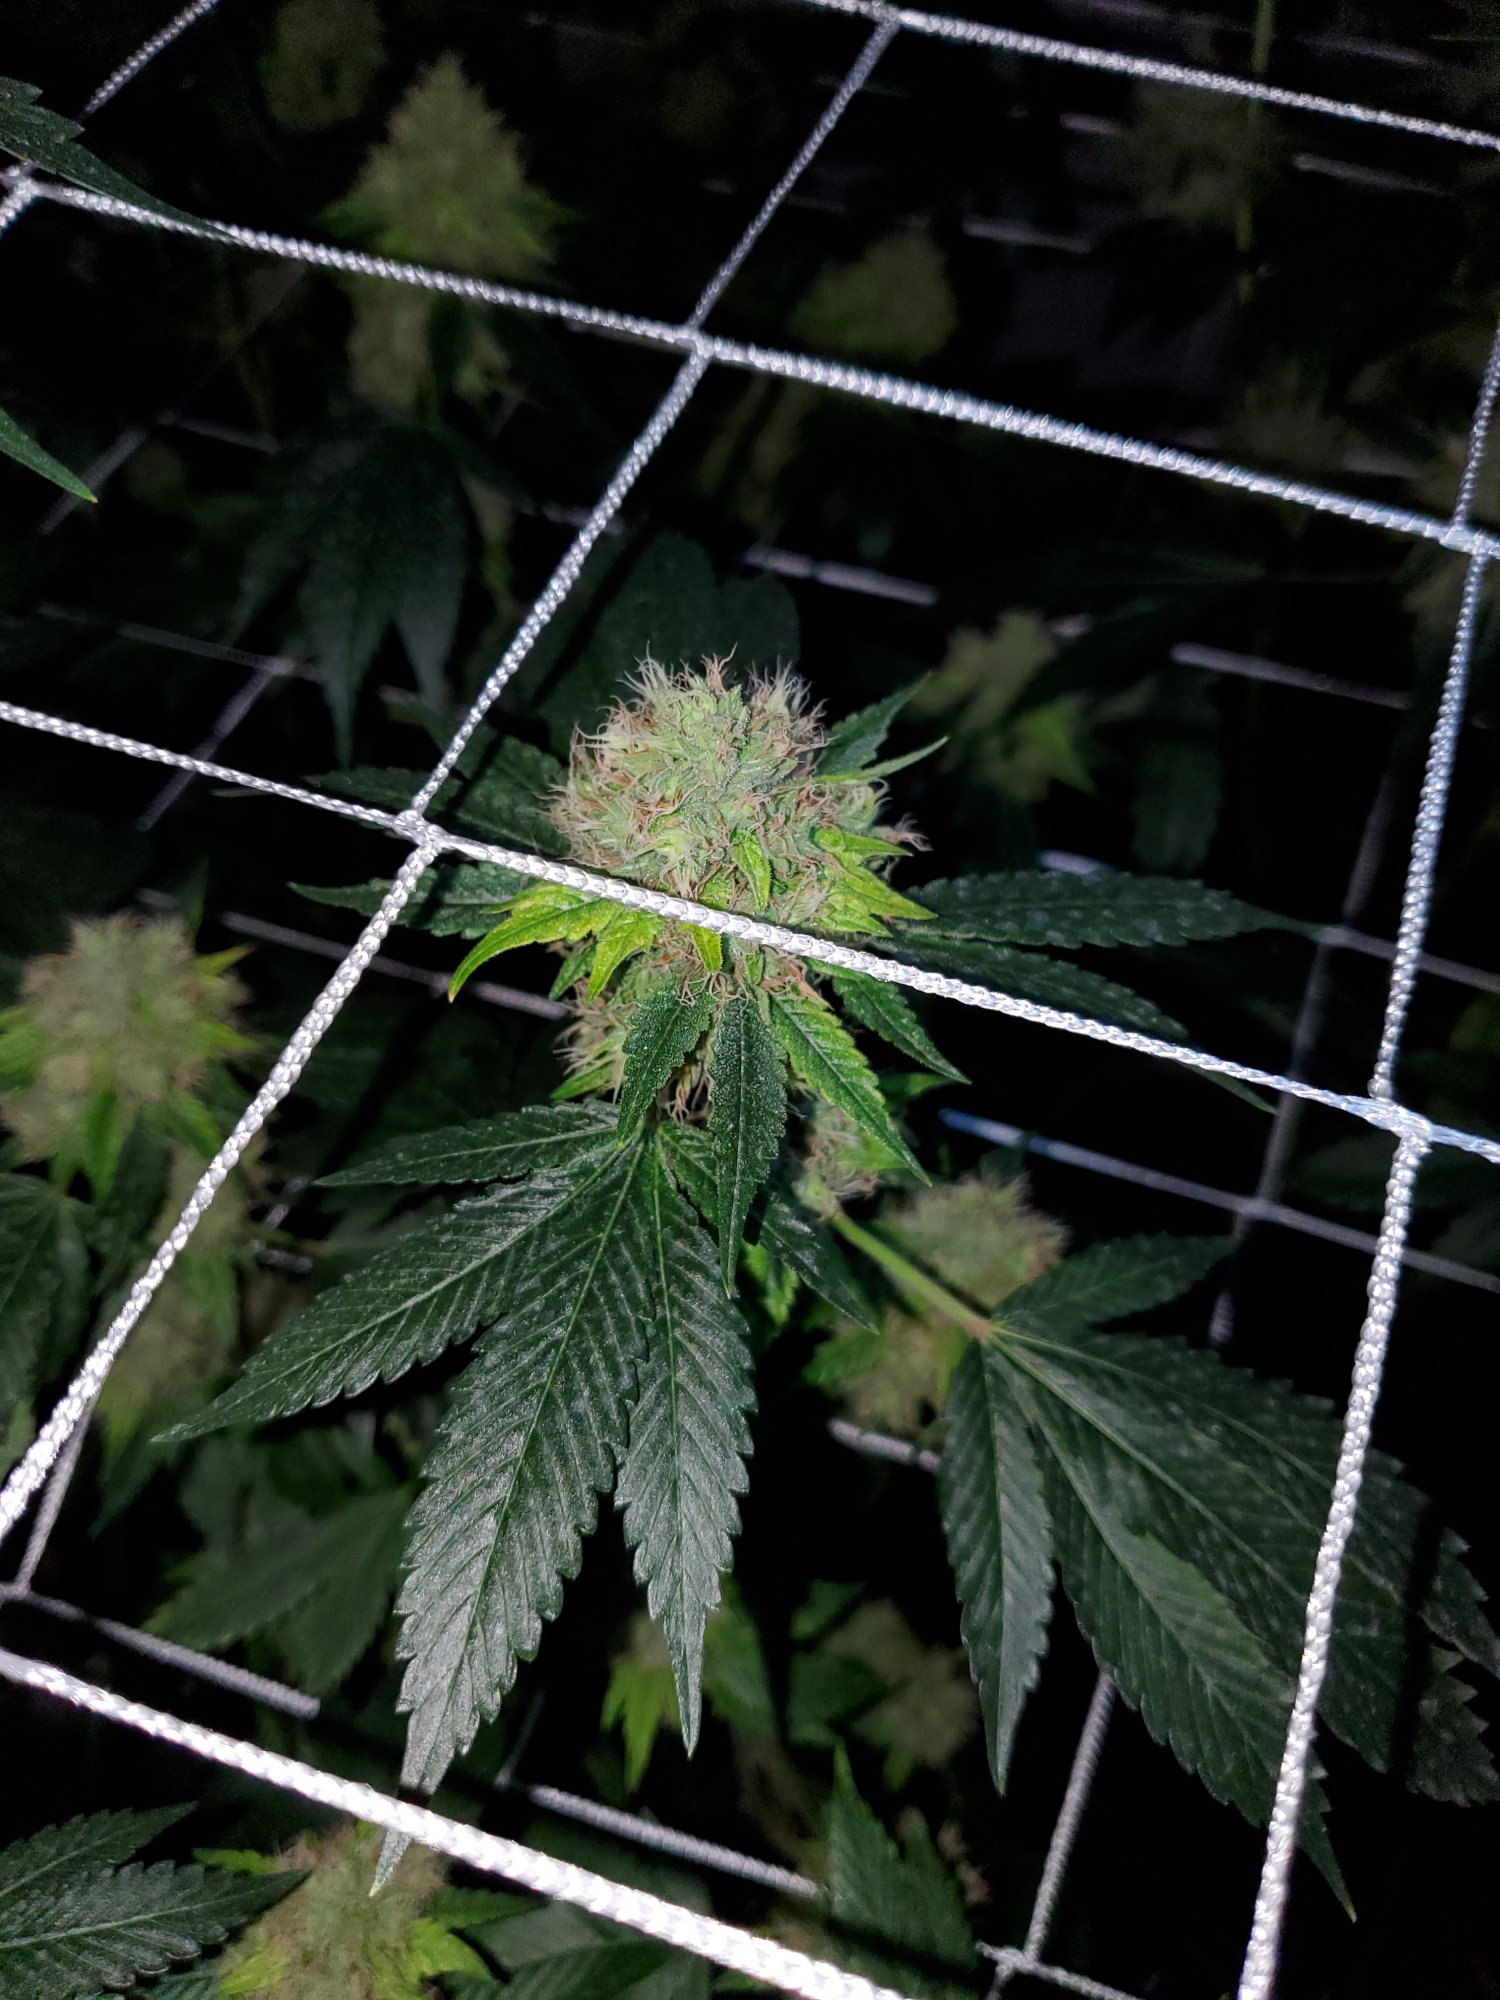 Yellowing of top bud sites 4